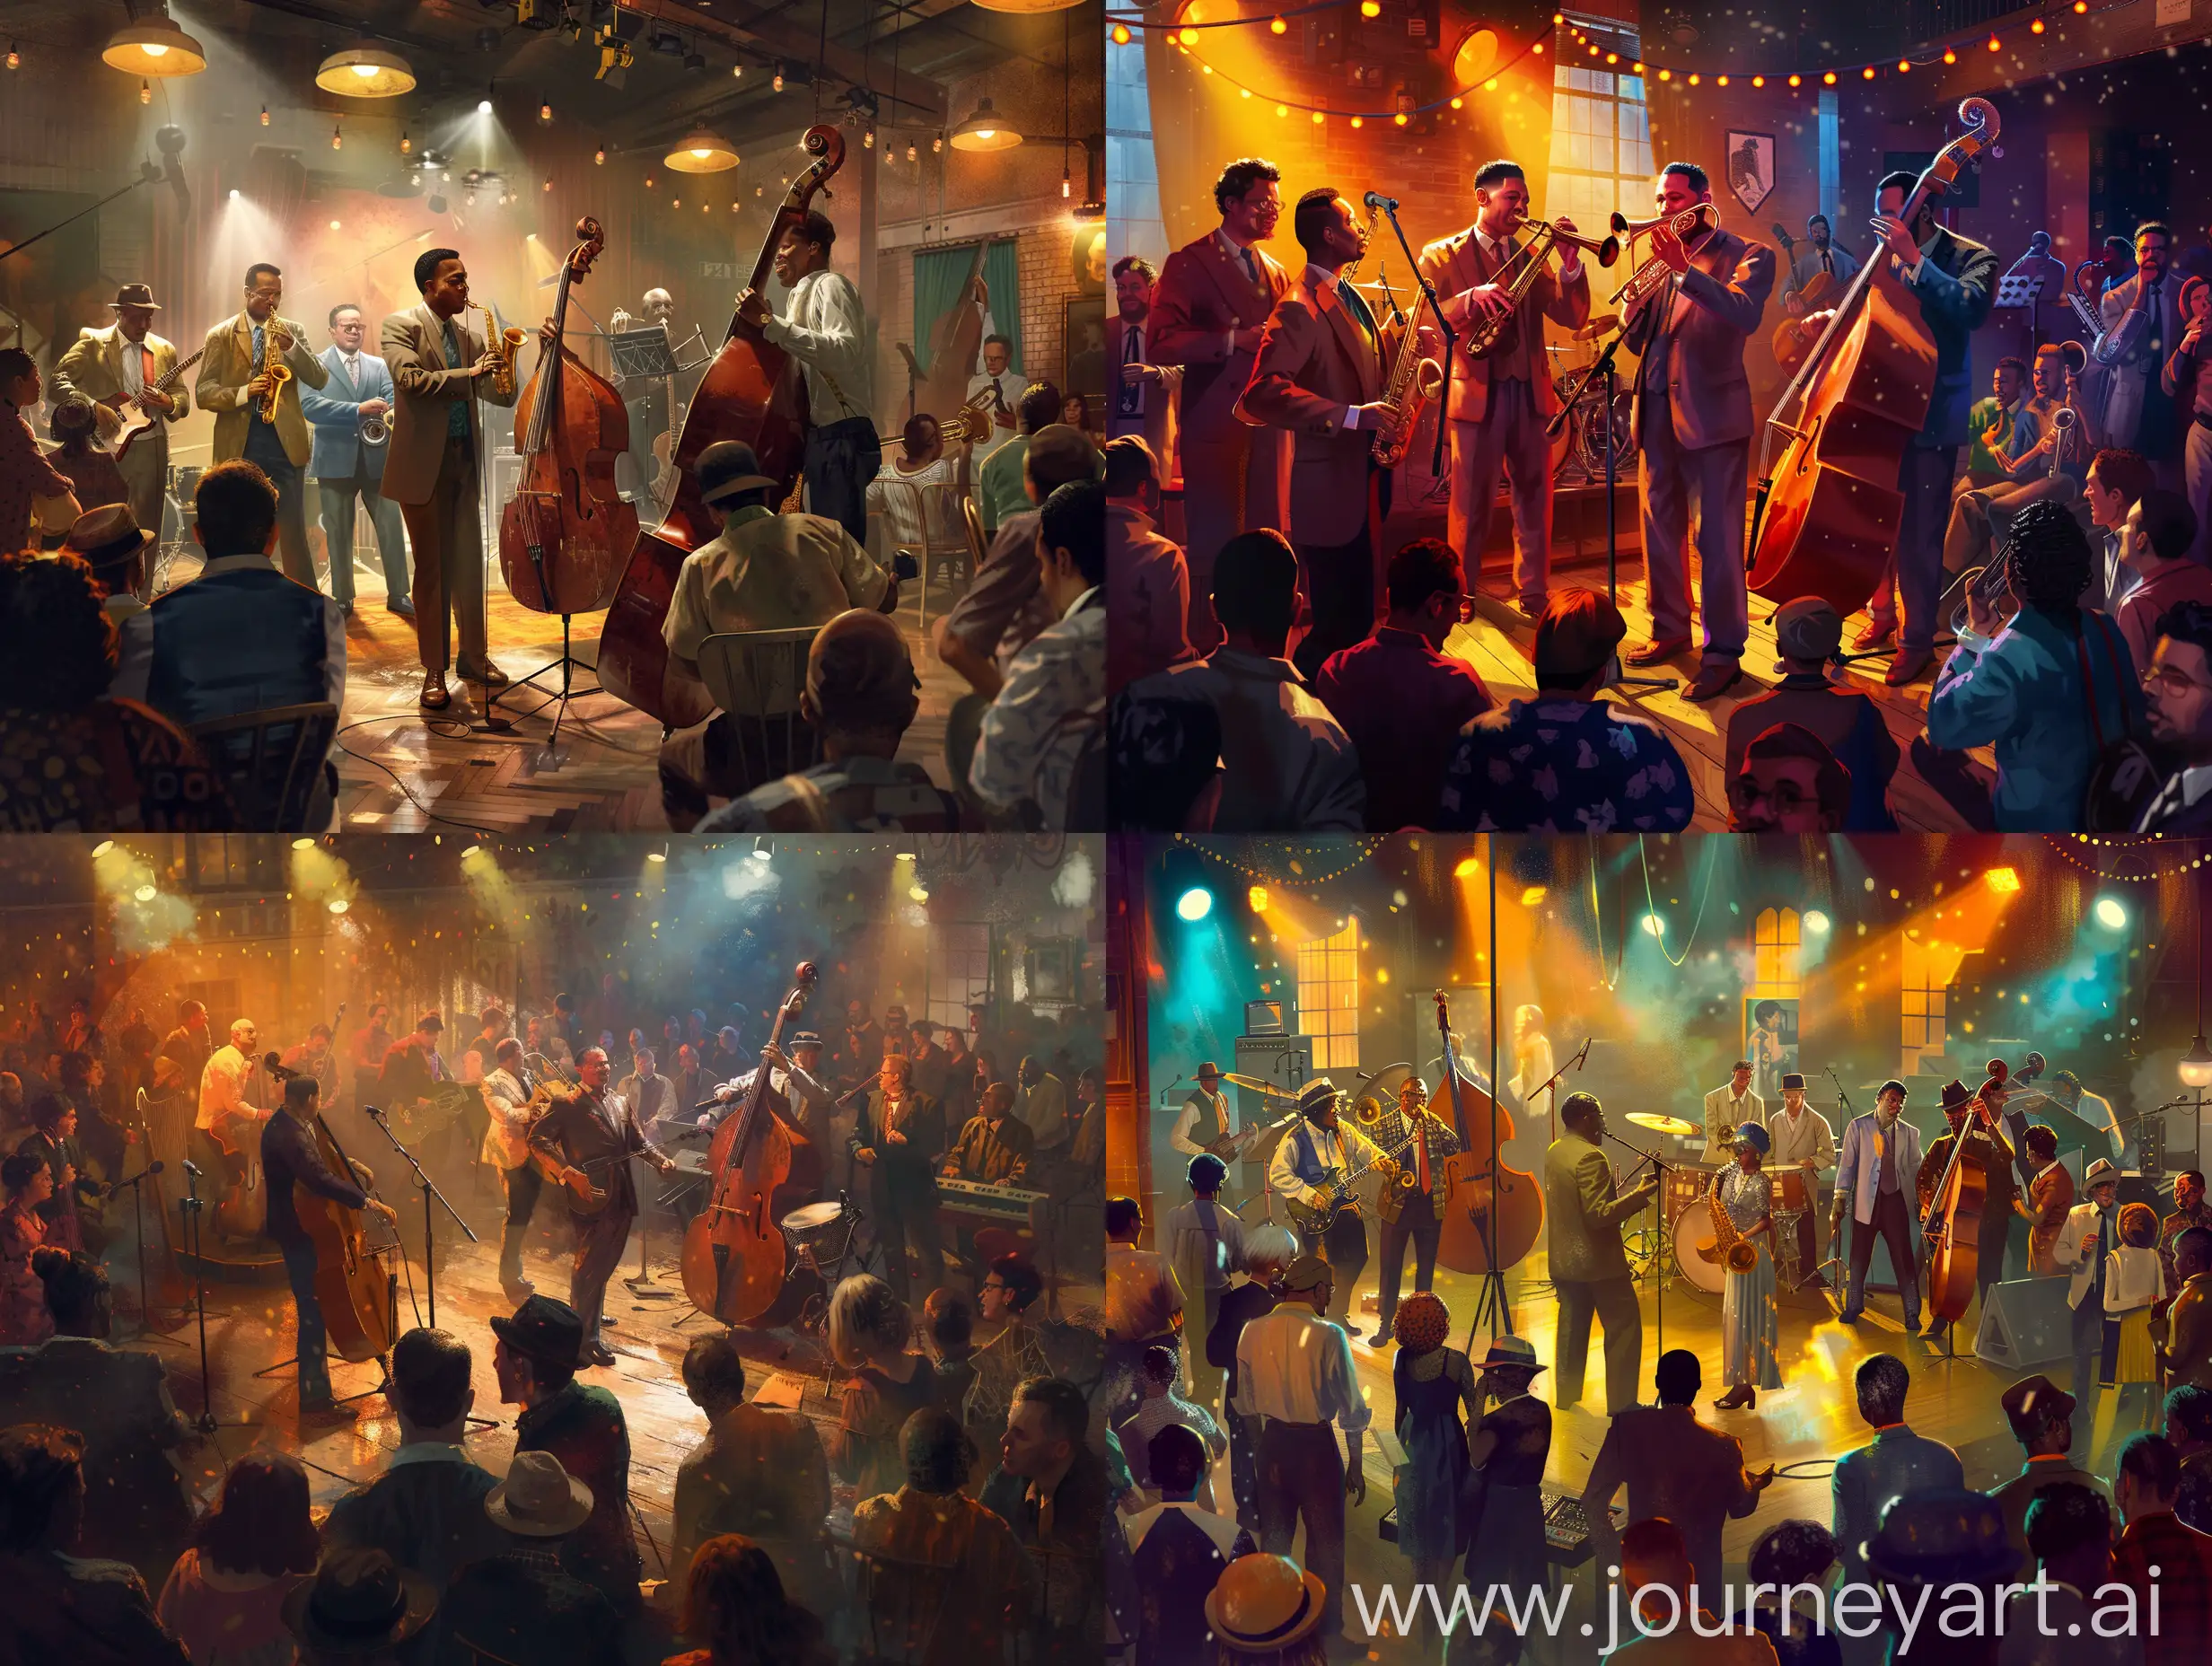 A realistic portrayal of a time-traveling jazz performance, showcasing musicians from different eras playing together on stage, while a crowd of people from various time periods enjoys the show (medium: photorealistic digital painting)(style: inspired by the artwork of album covers and concert posters from different eras)(lighting: stage lighting with a warm, intim discreet atmosphere)(colors: rich and vibrant, reflecting the evolution of jazz and the diversity of the audience)(composition: shot with a 24mm wide-angle lens, capturing the musicians on stage, as well as the eclectic crowd)